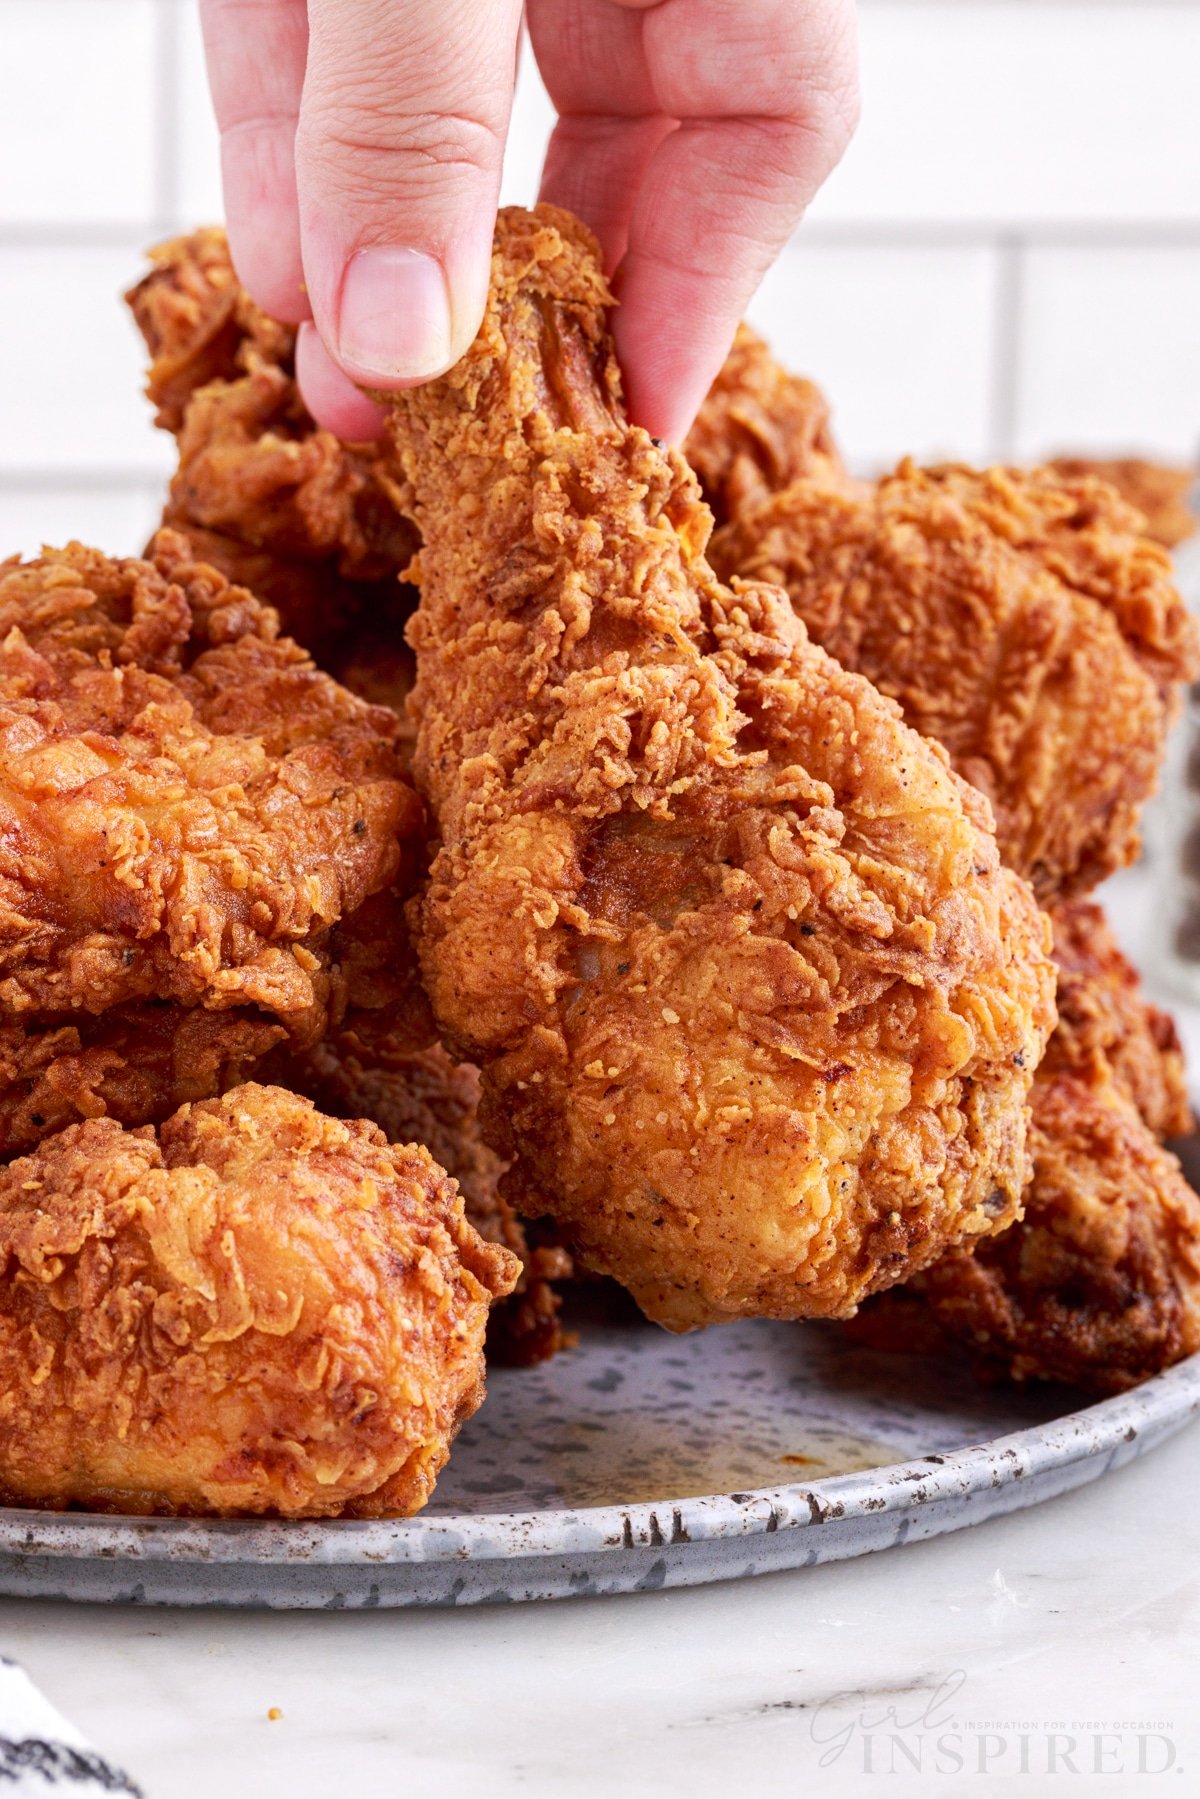 lifting a southern fried chicken drumstick above the dish of fried chicken